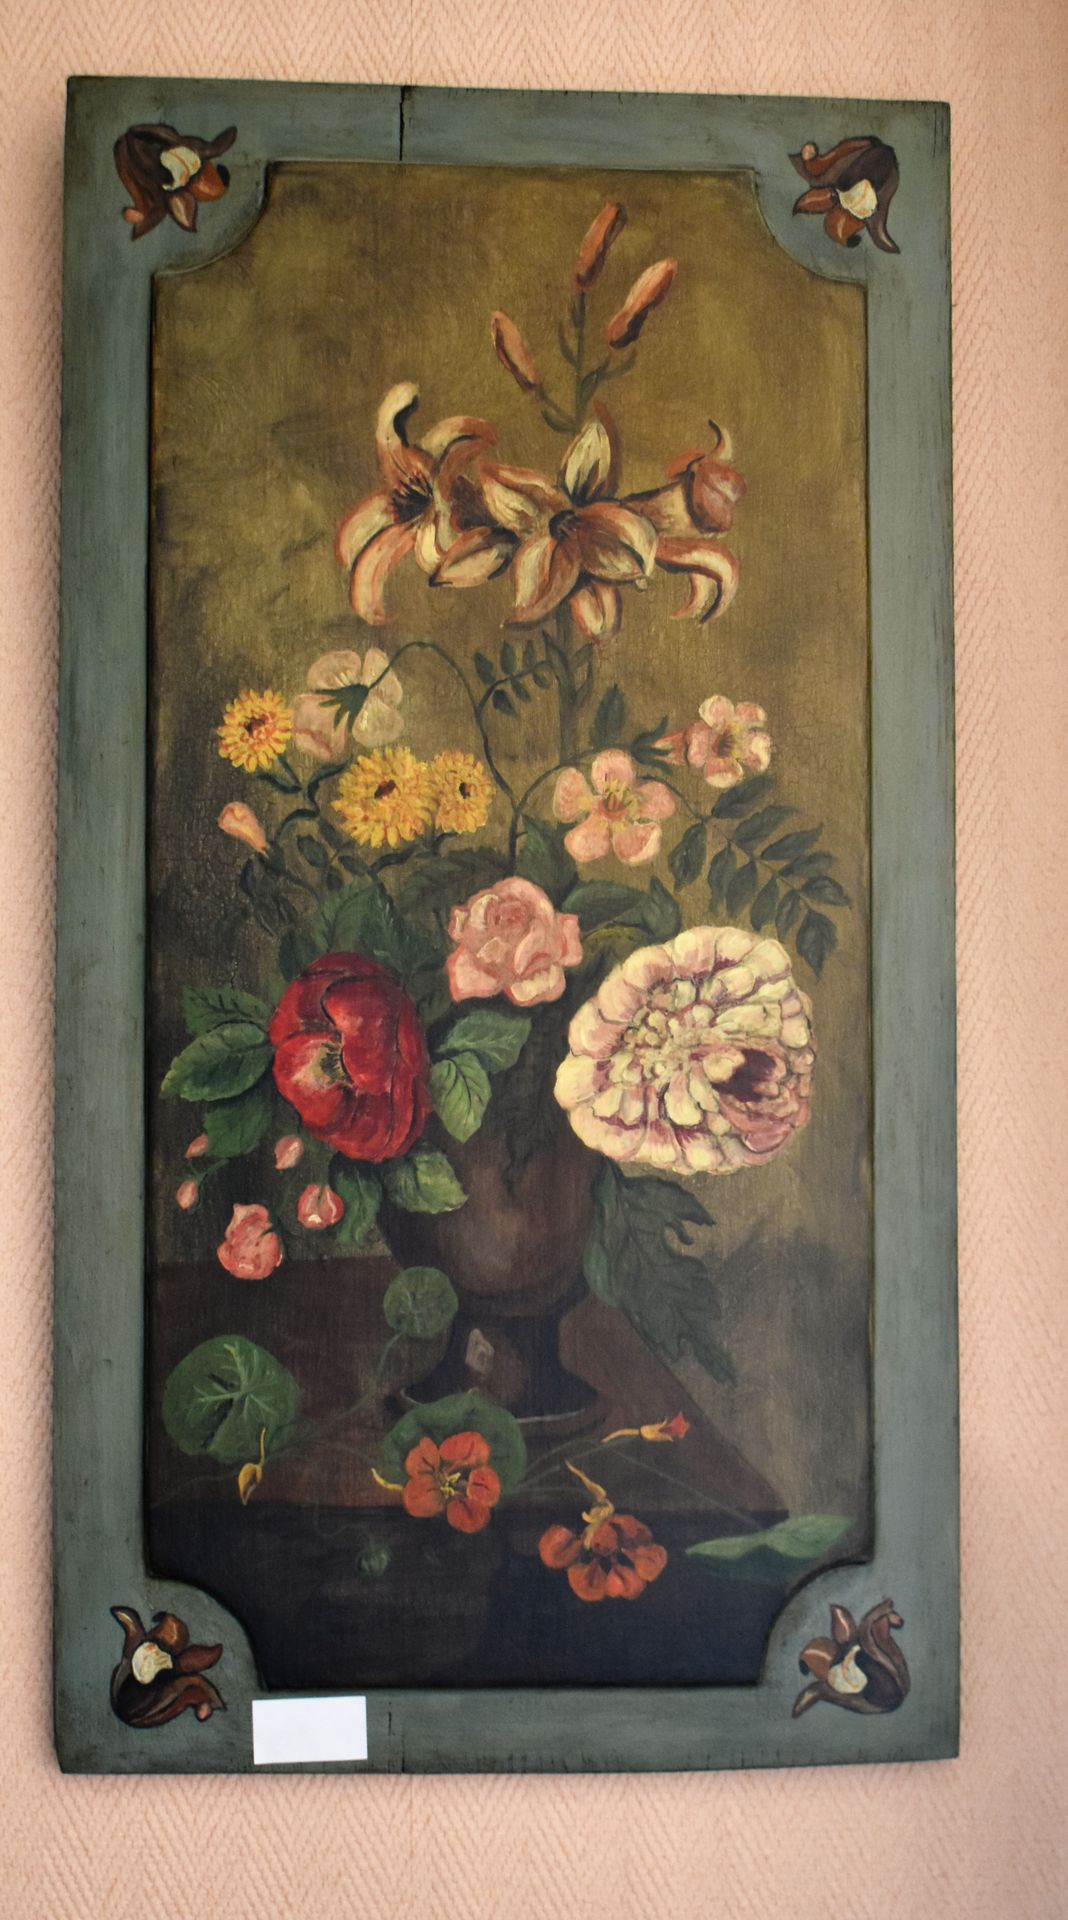 Null Decorative painting on panel : Flowers. Height 58 - Width 31 cm